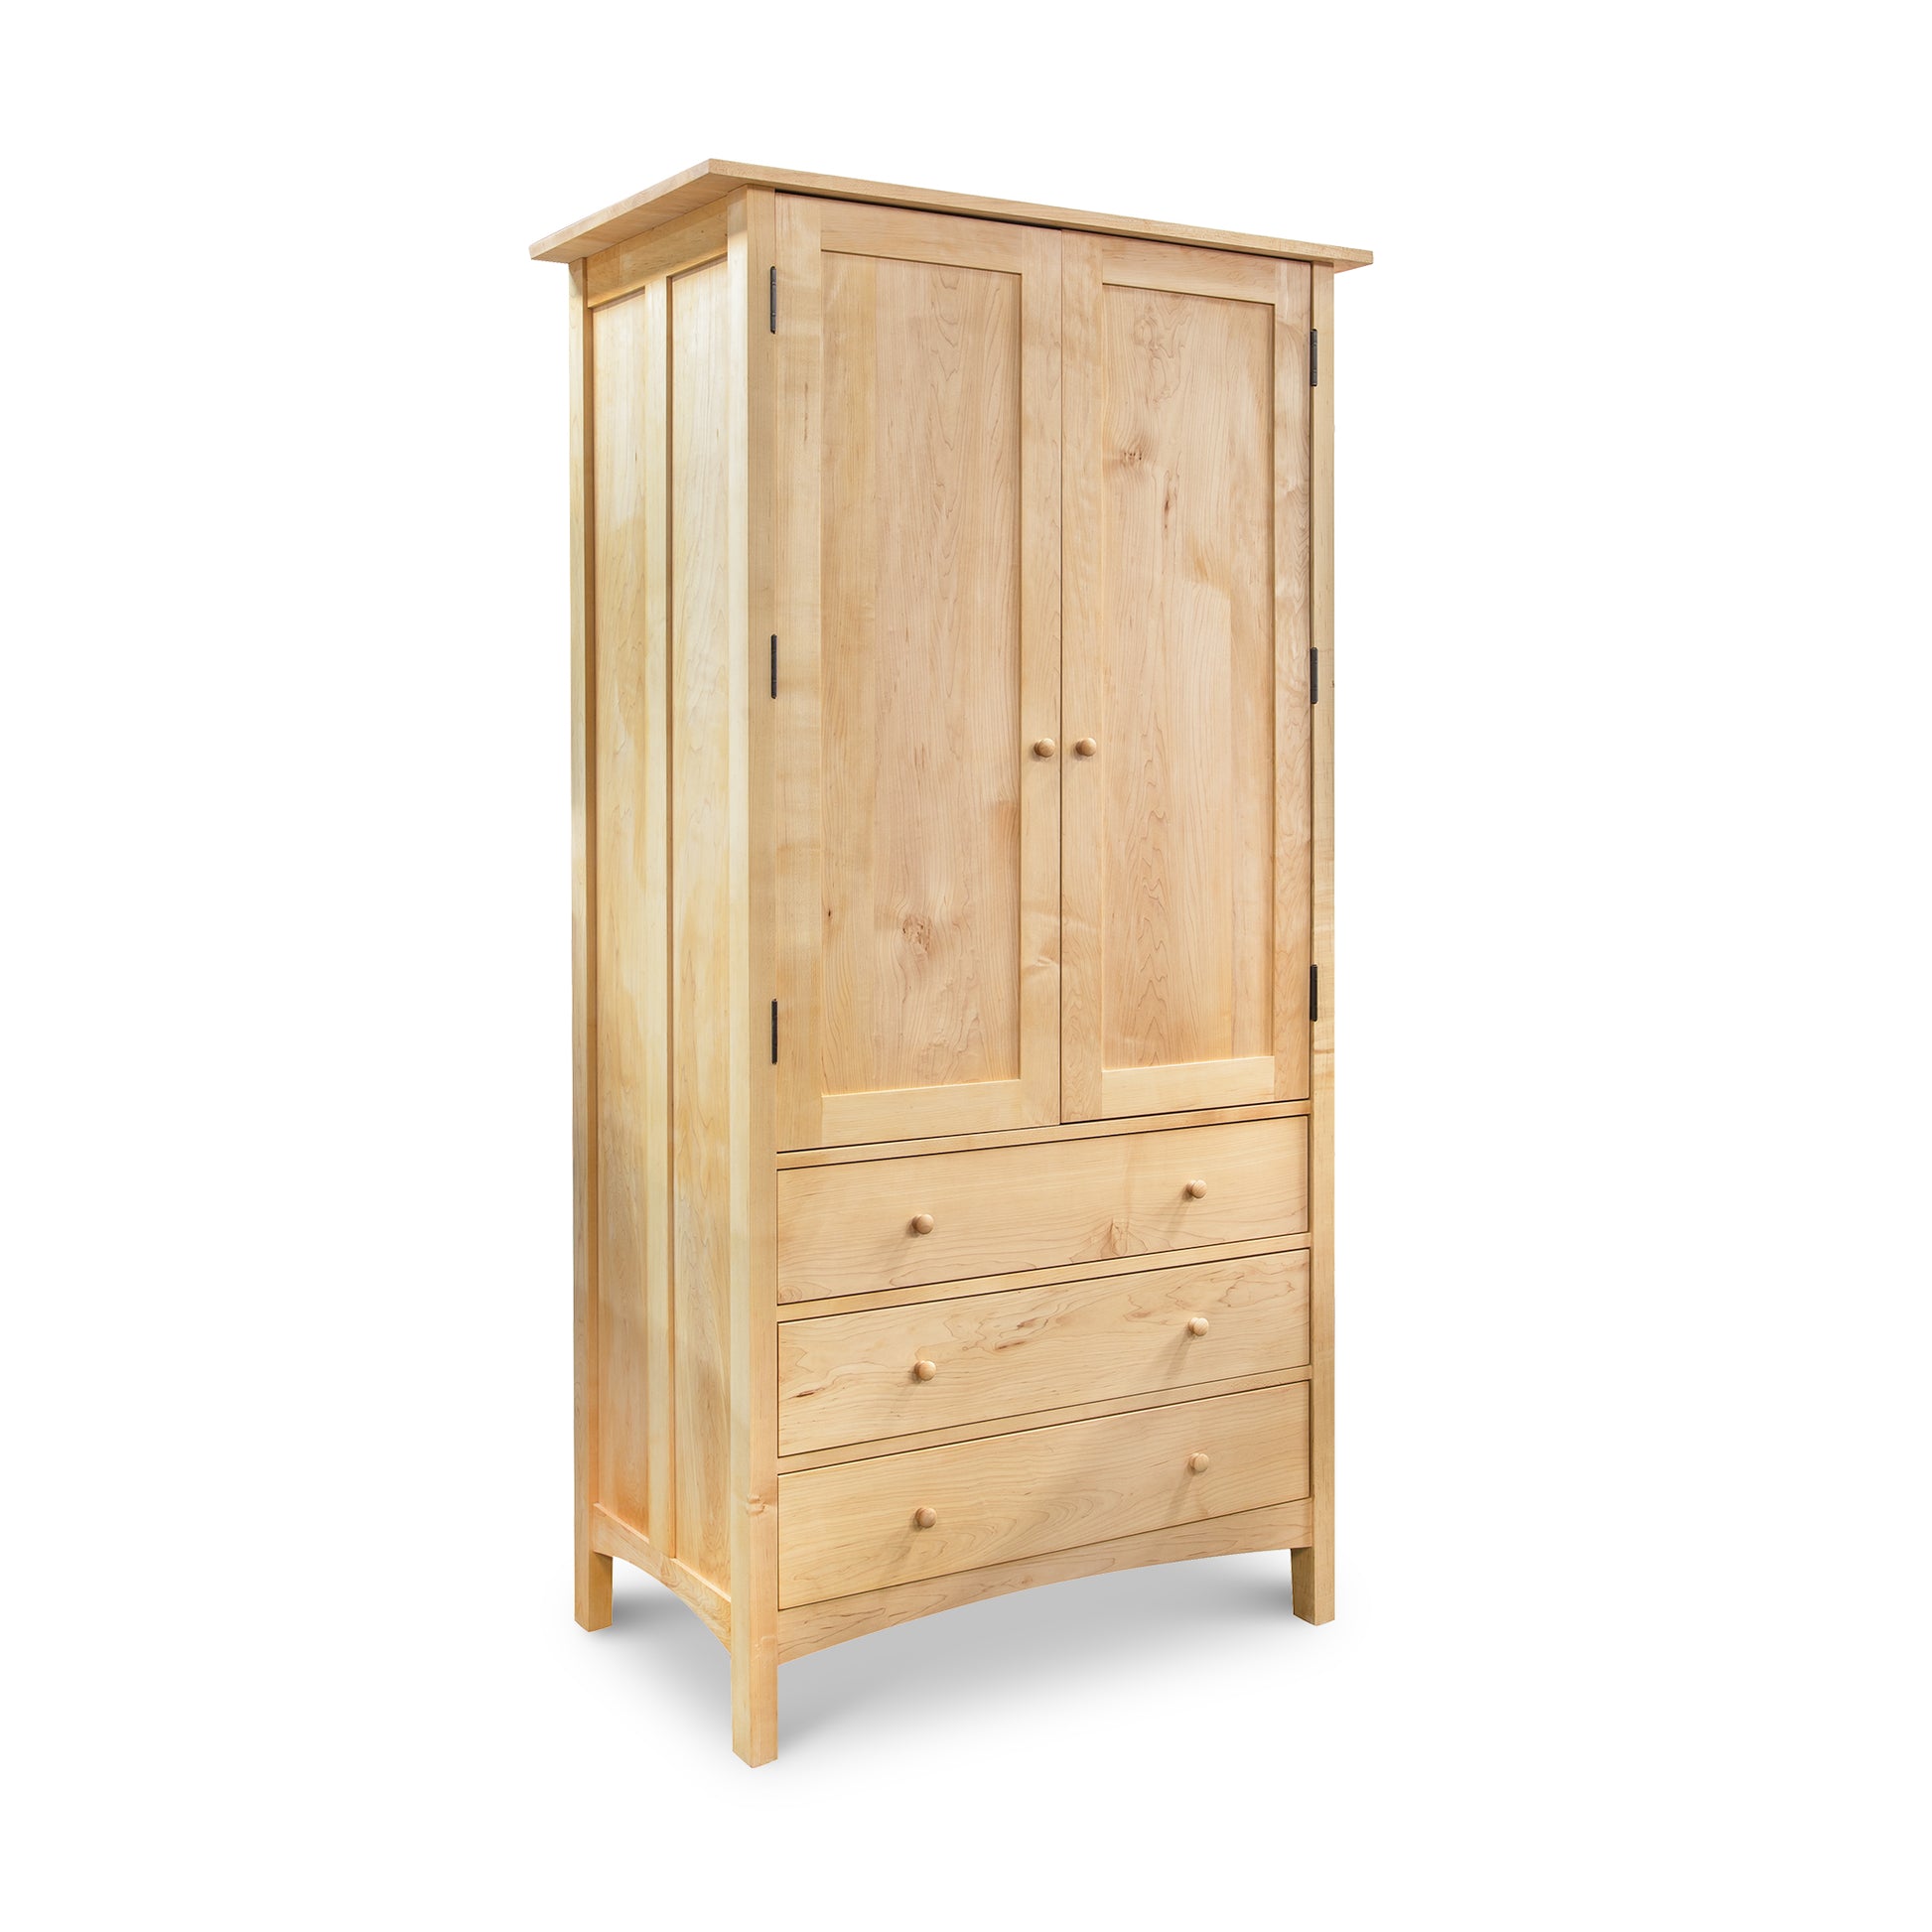 Vermont Furniture Designs Burlington Shaker Tall Armoire with two doors and three drawers on a white background.